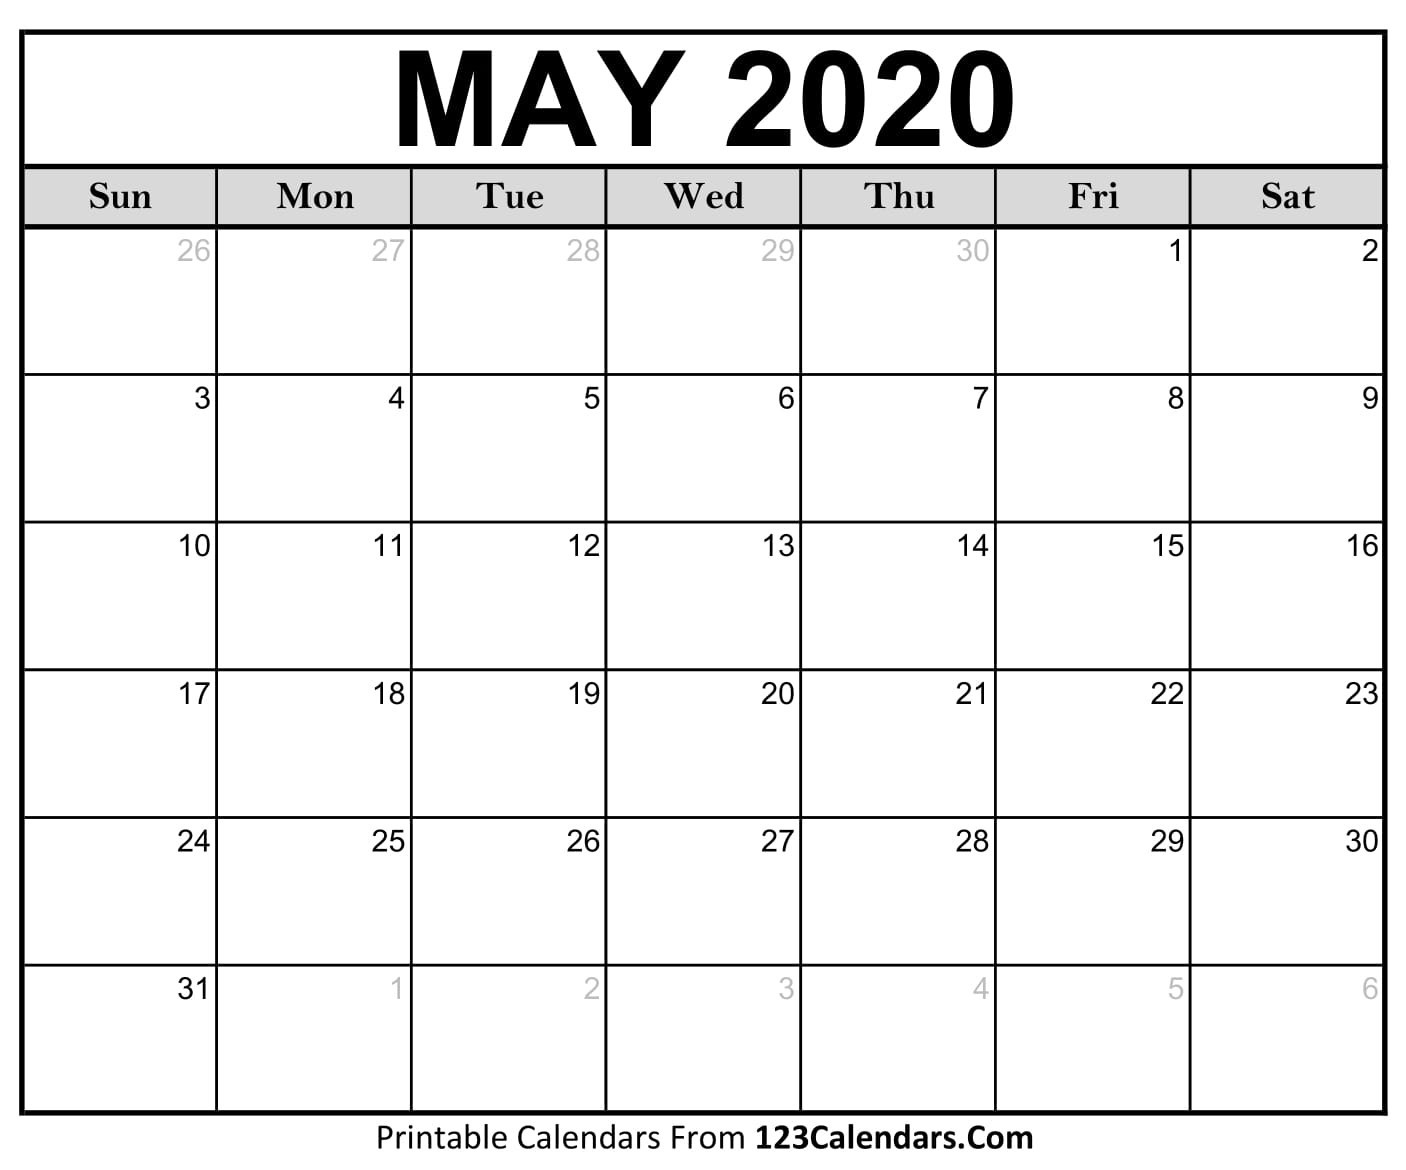 Where I Print A Full Page Monthly Calendar For 2020  Printable Calendar Full Page